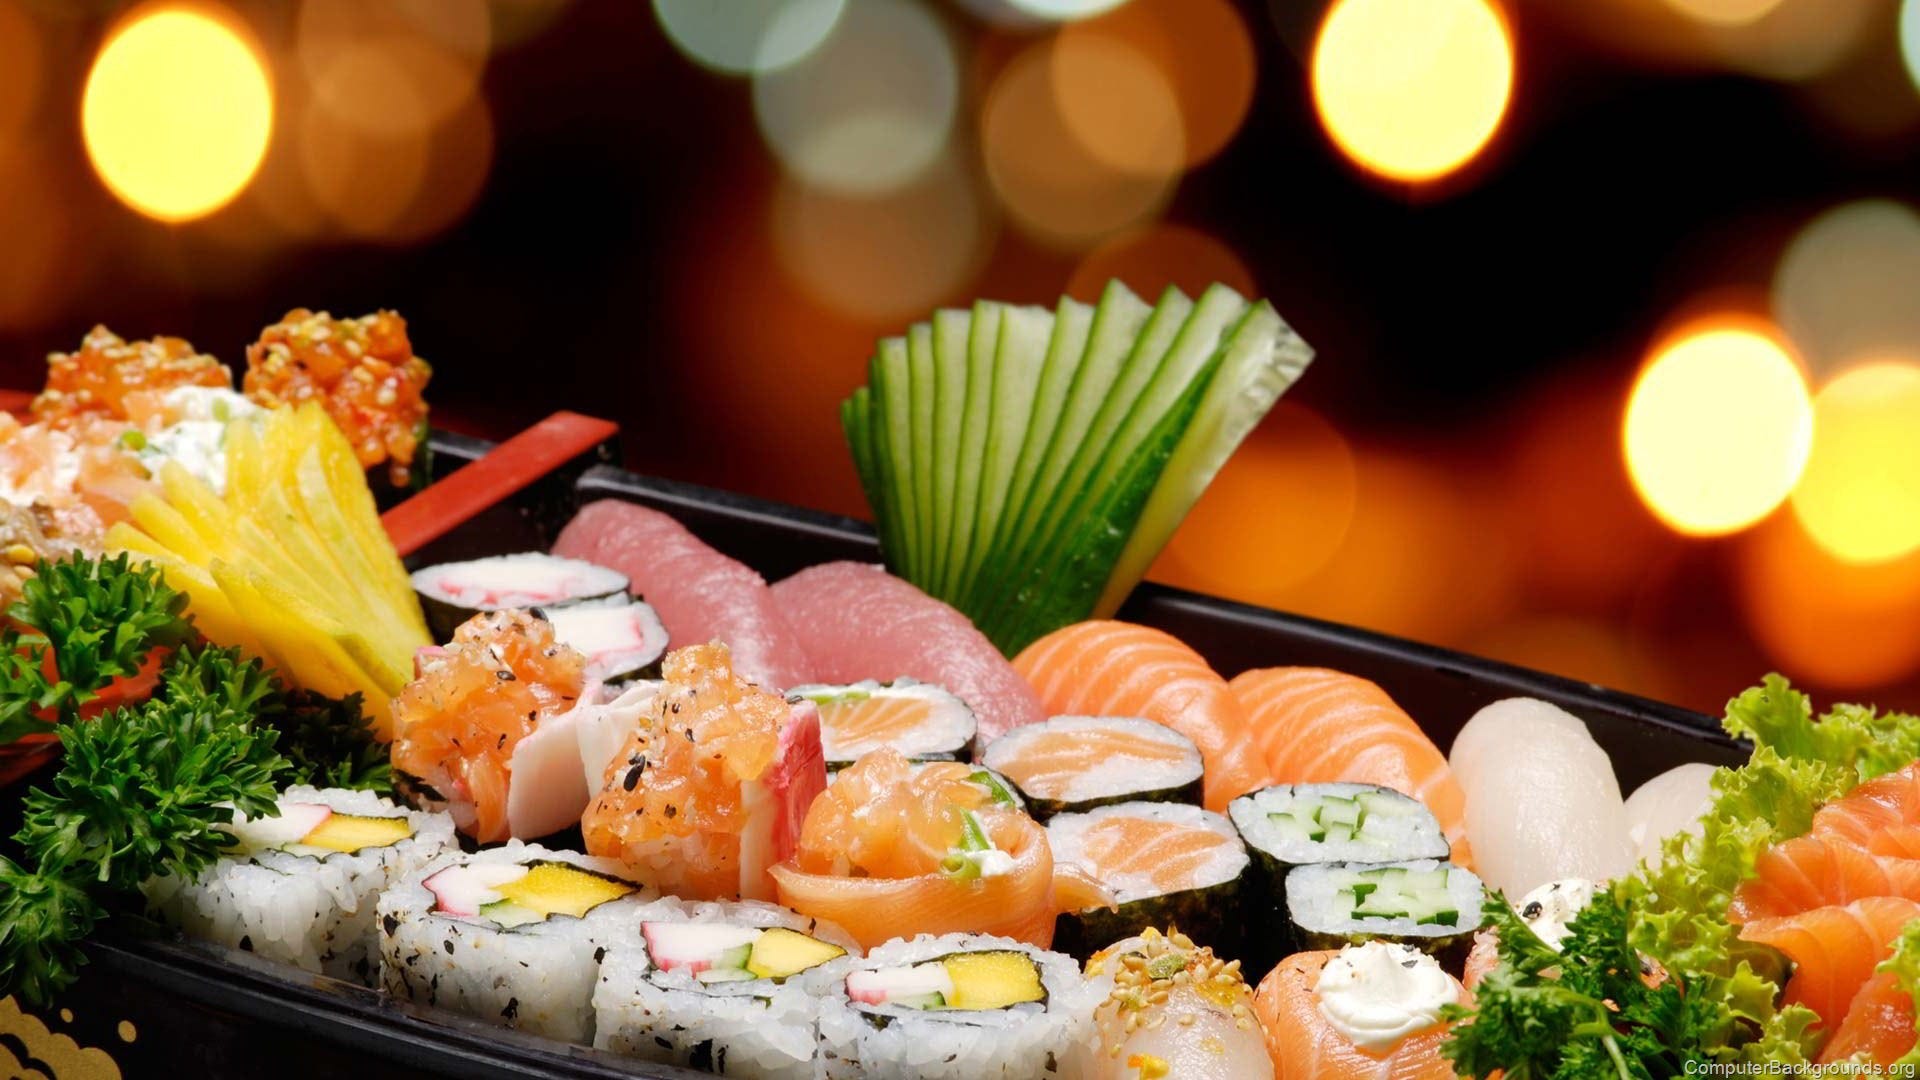 The Most Popular Japanese Dish : ‘SUSHI’ All You Can Eat